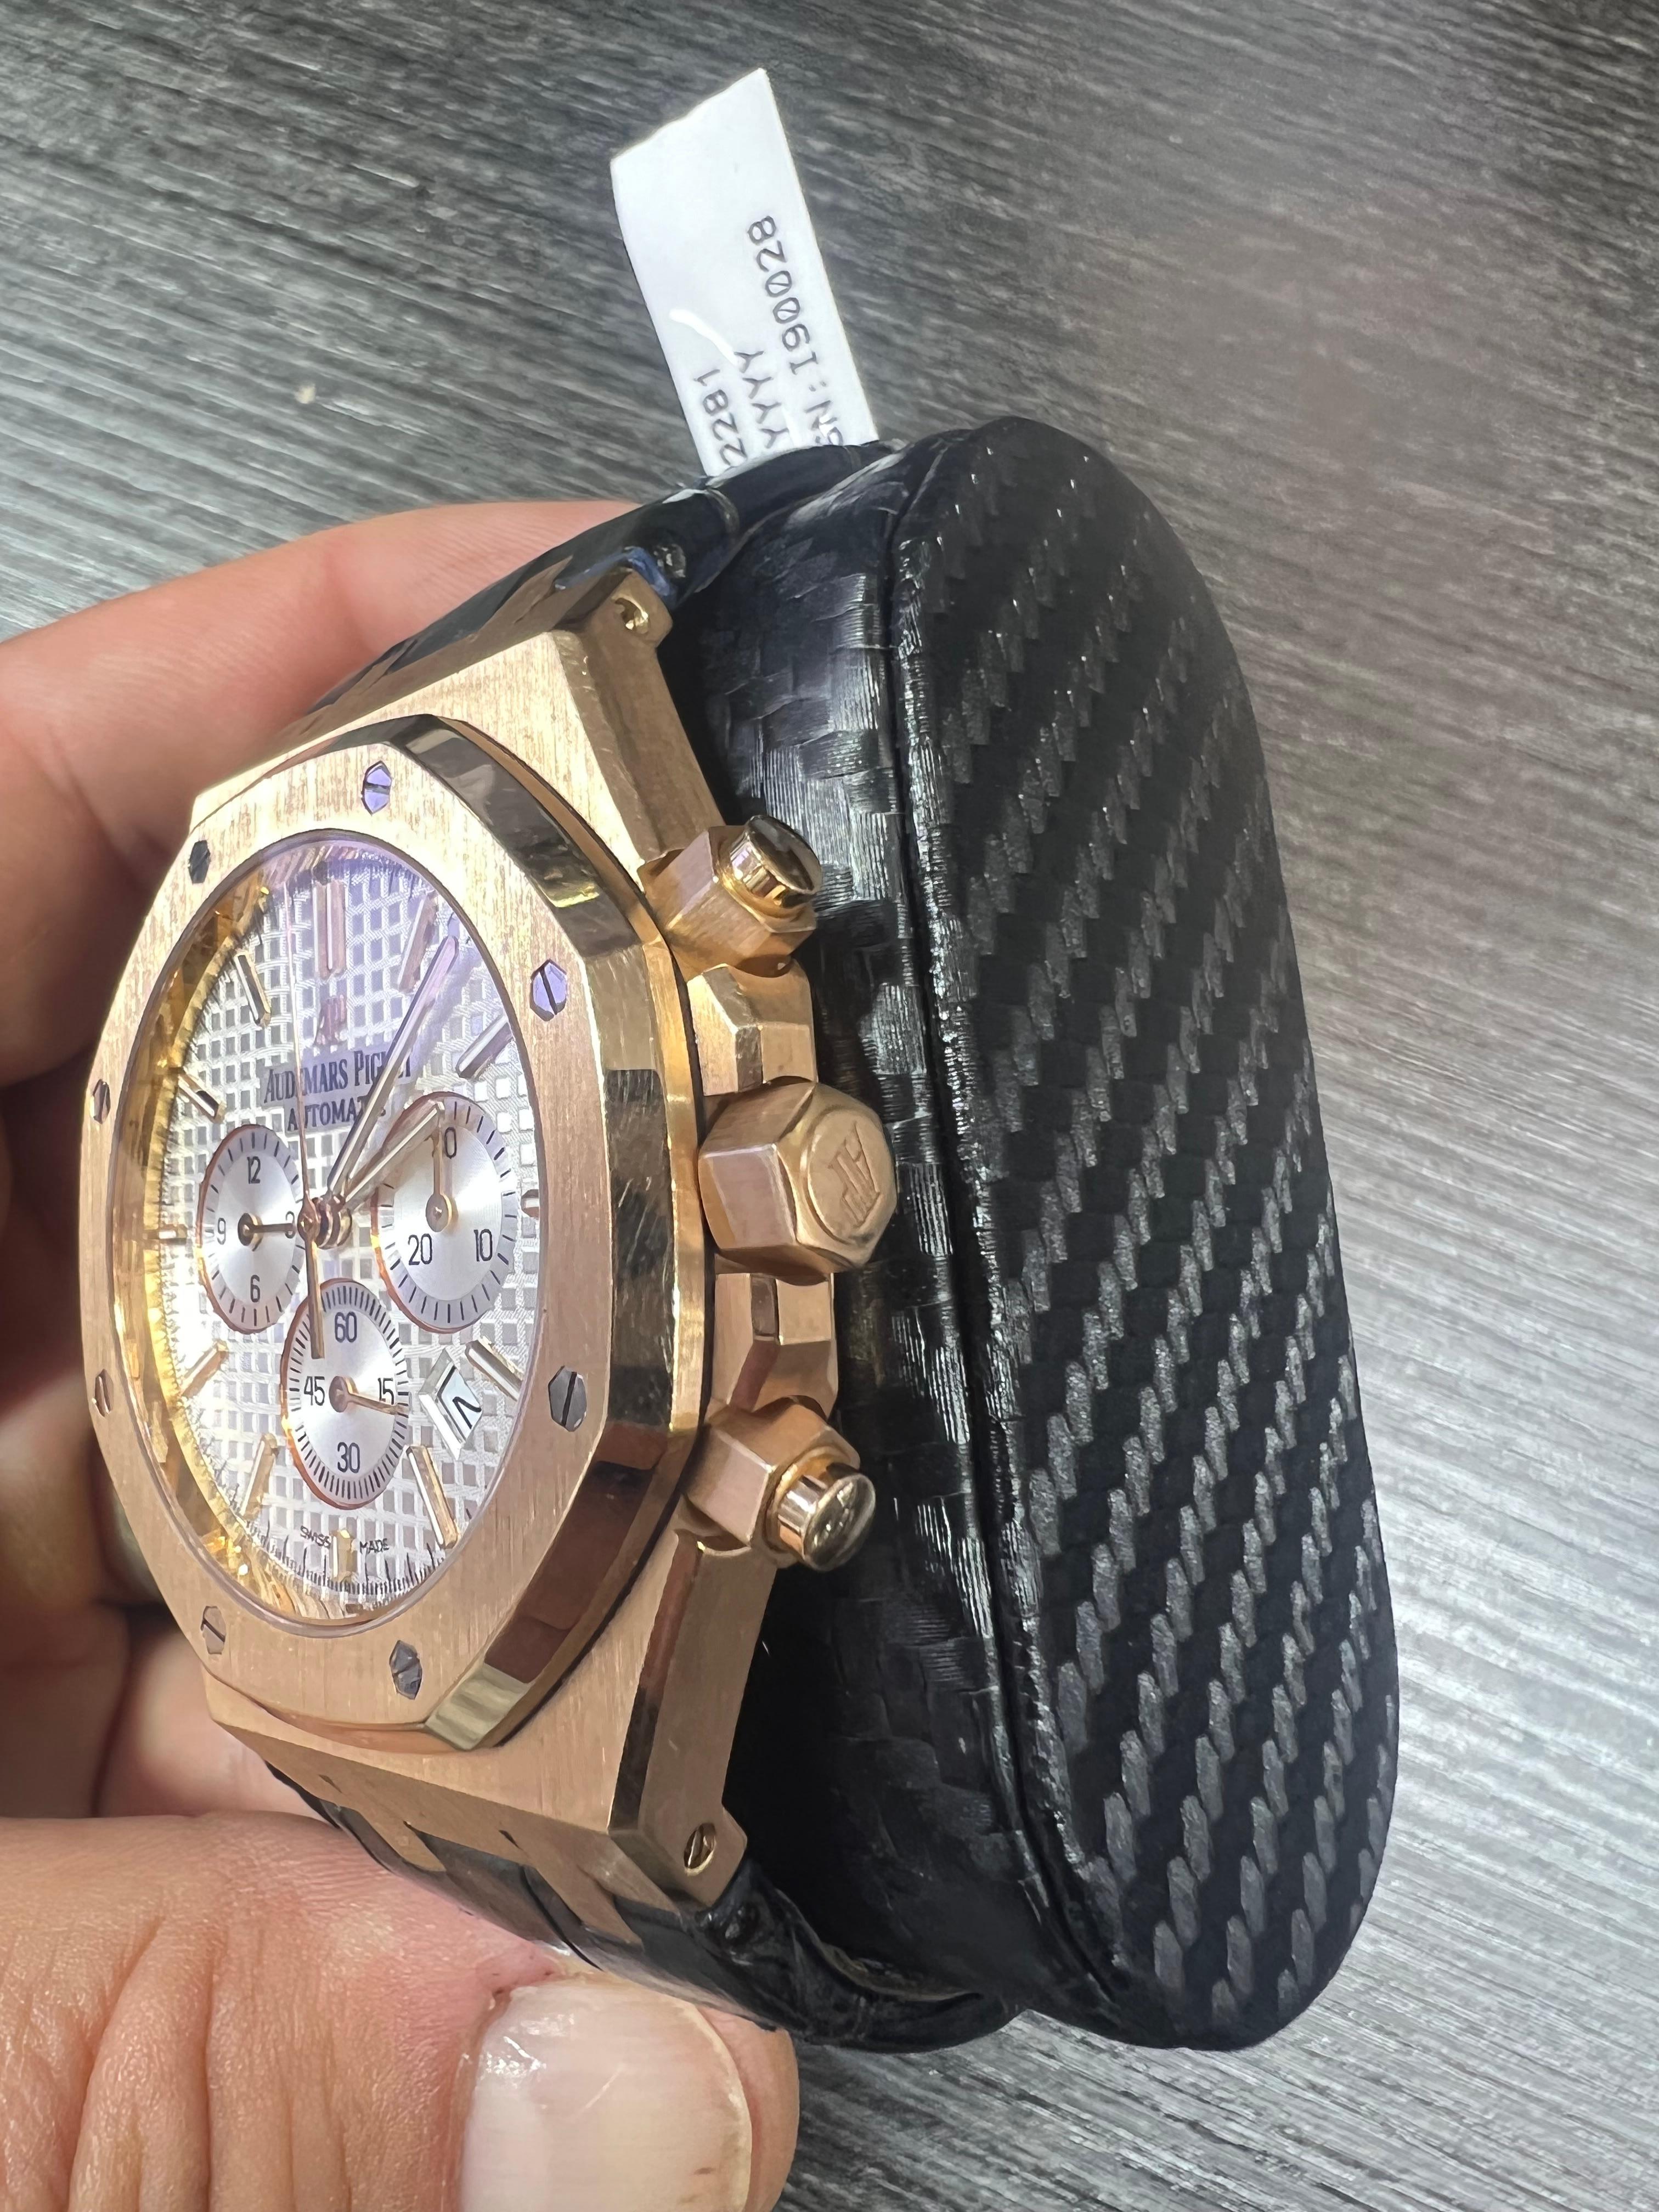 Audemars Piguet Royal Oak 41mm 18K Rose Gold Men's Watch

comes with Original Box

excellent condition!!

runs perfect!

free overnight insured shipping

shop with confidence

evitadiamonds